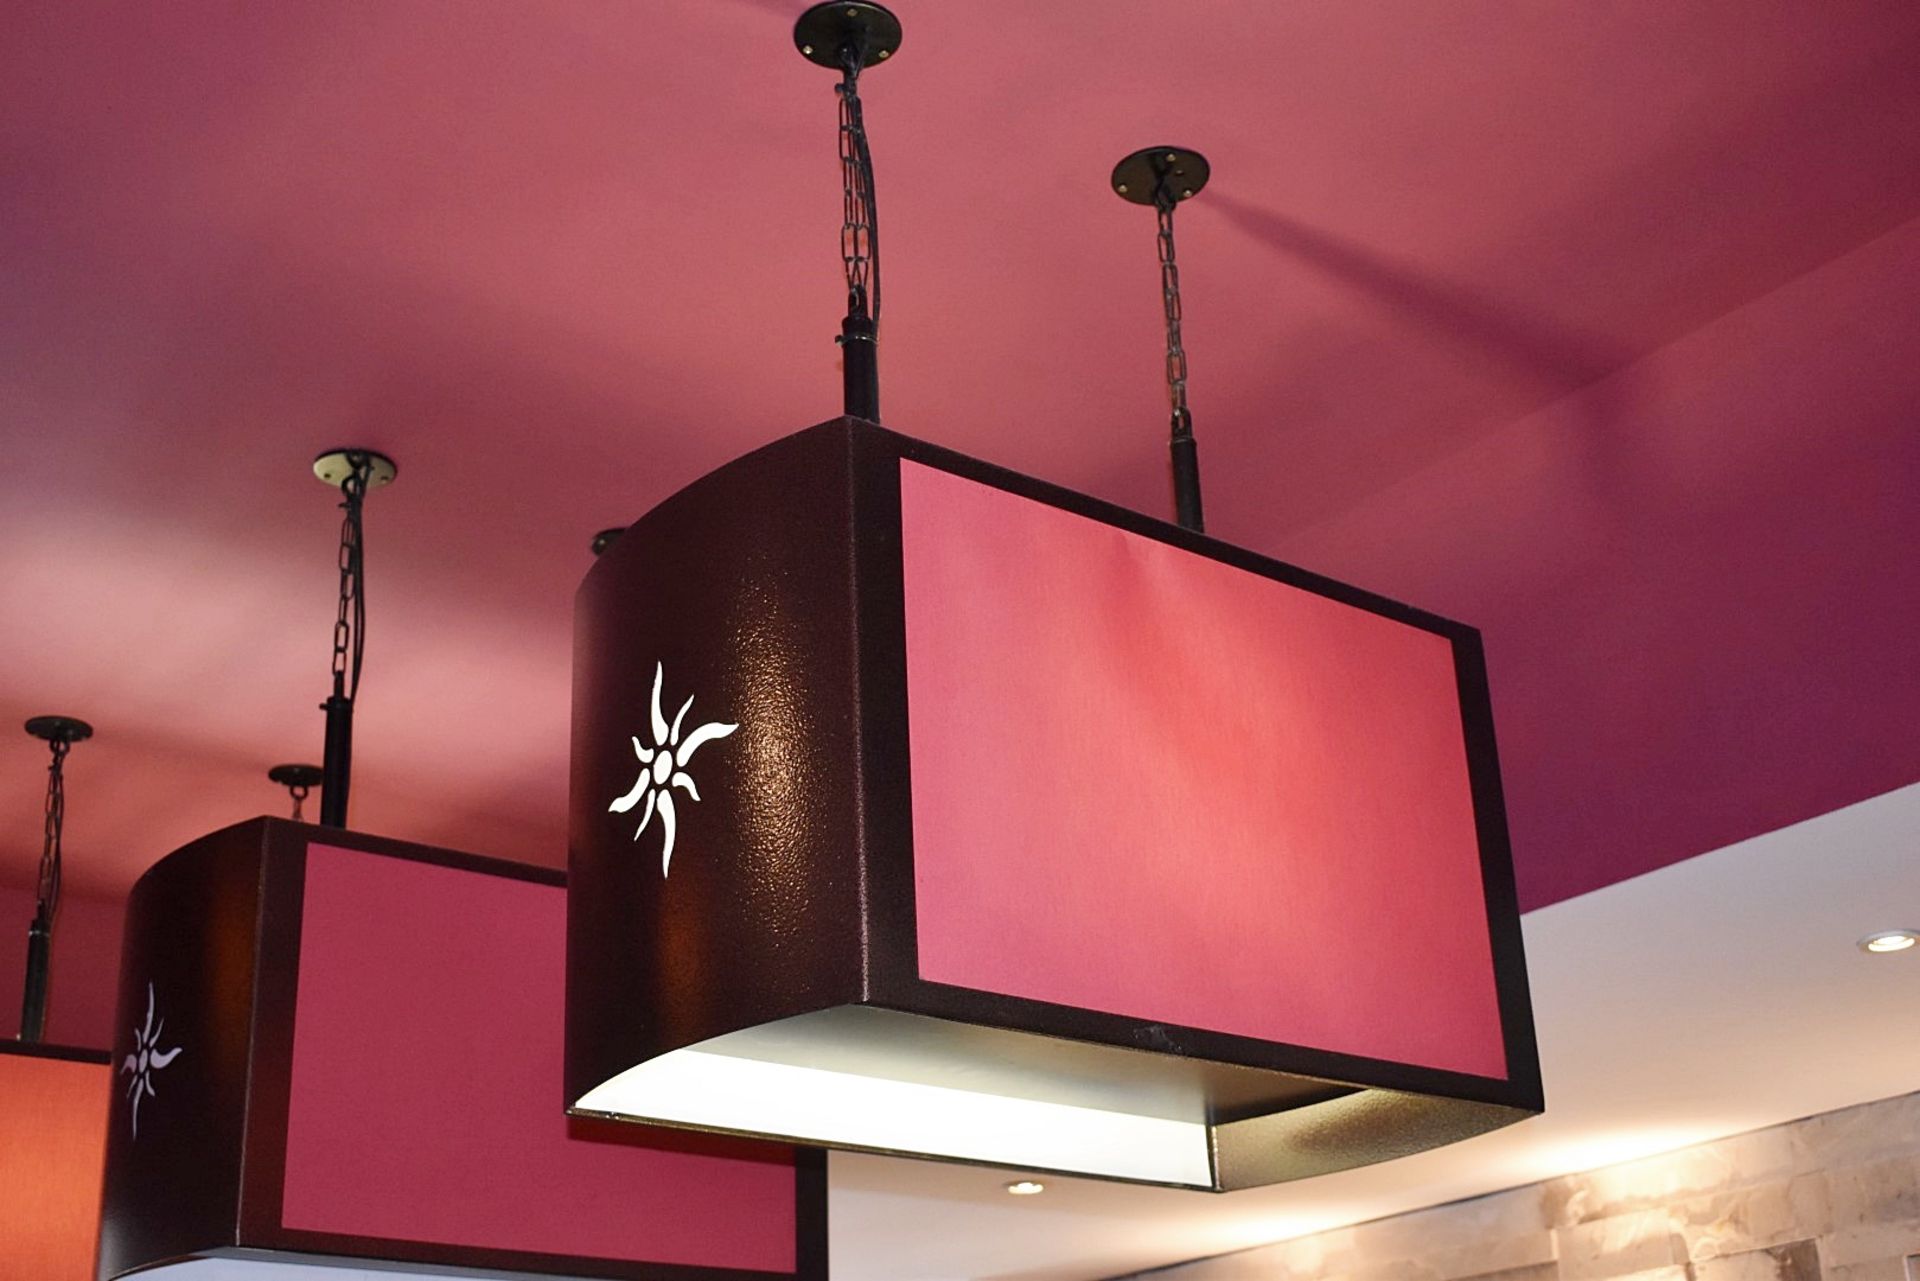 3 x Contemporary Suspended Ceiling Lights in Brown With Cut Out Star Design & Red Fabric Shade Sides - Bild 3 aus 4